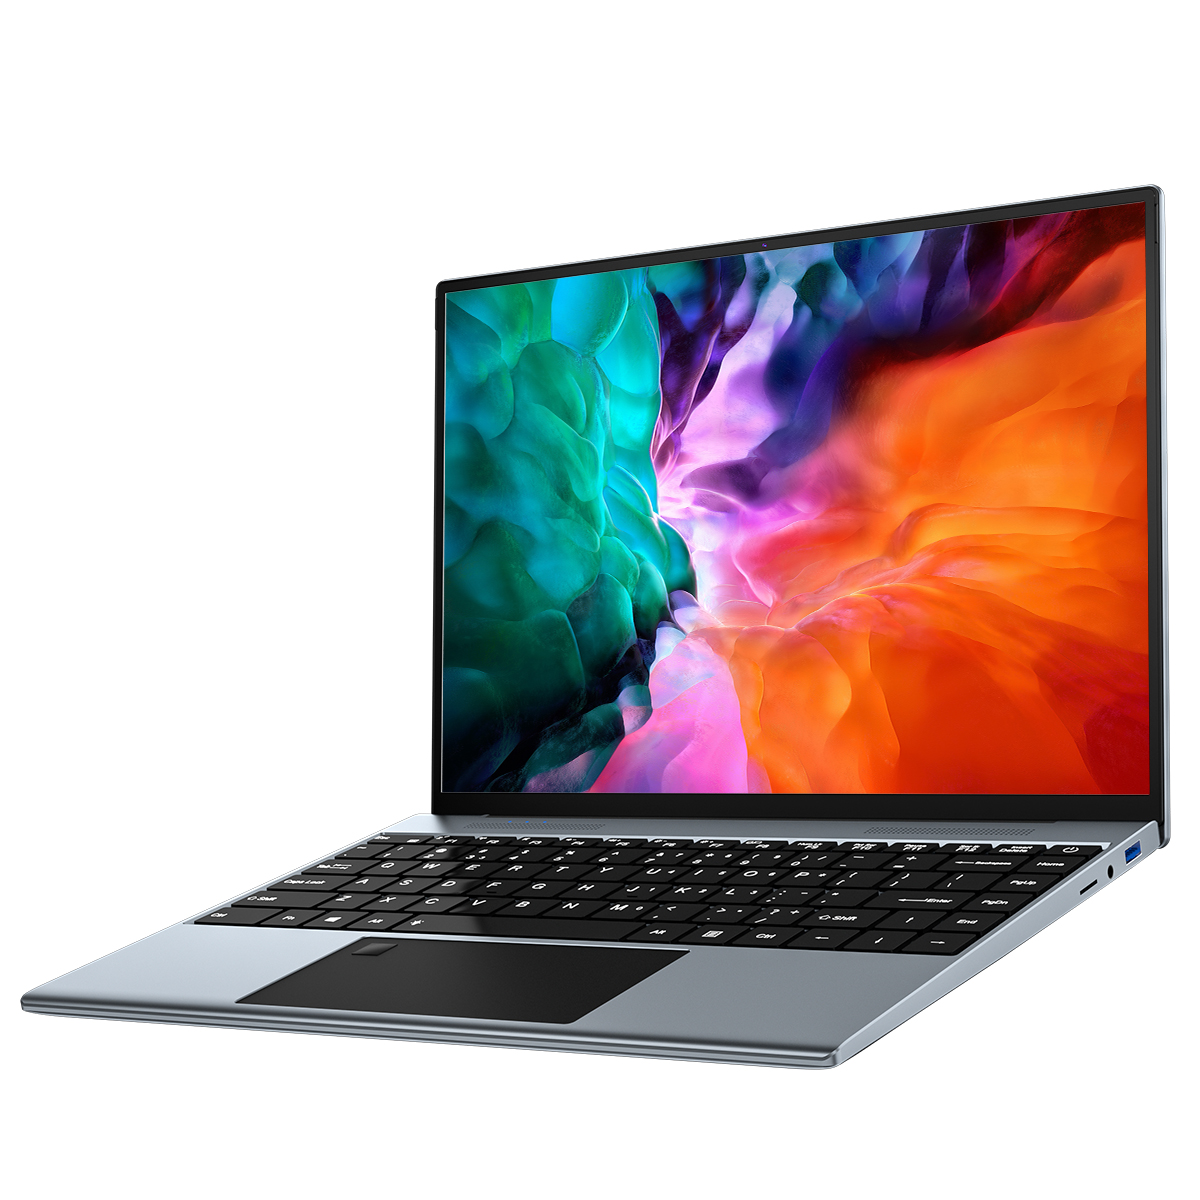 Find EU Direct KUU YoBook Pro Laptop 13 5 inch 3000 x 2000 3 2 100 sRGB Full View Screen Intel N4120 8GB RAM 256GB SSD 38Wh Battery 1 2KG Lightweight Type C Backlit Windows10 Pro Notebook for Sale on Gipsybee.com with cryptocurrencies